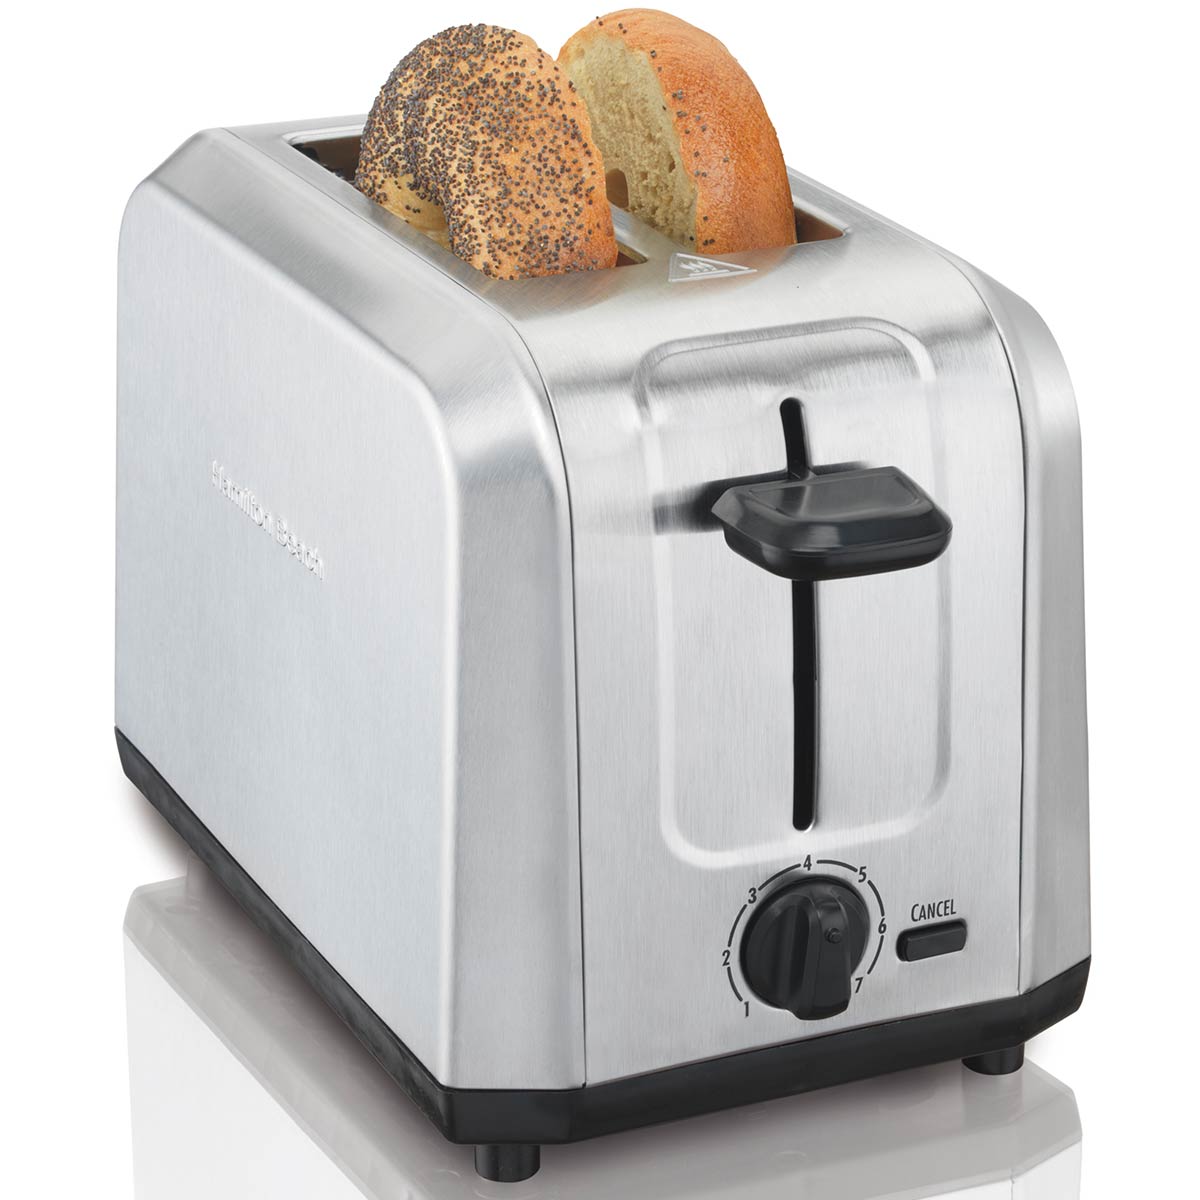 Brushed Stainless Steel 2-Slice Toaster (22910G)